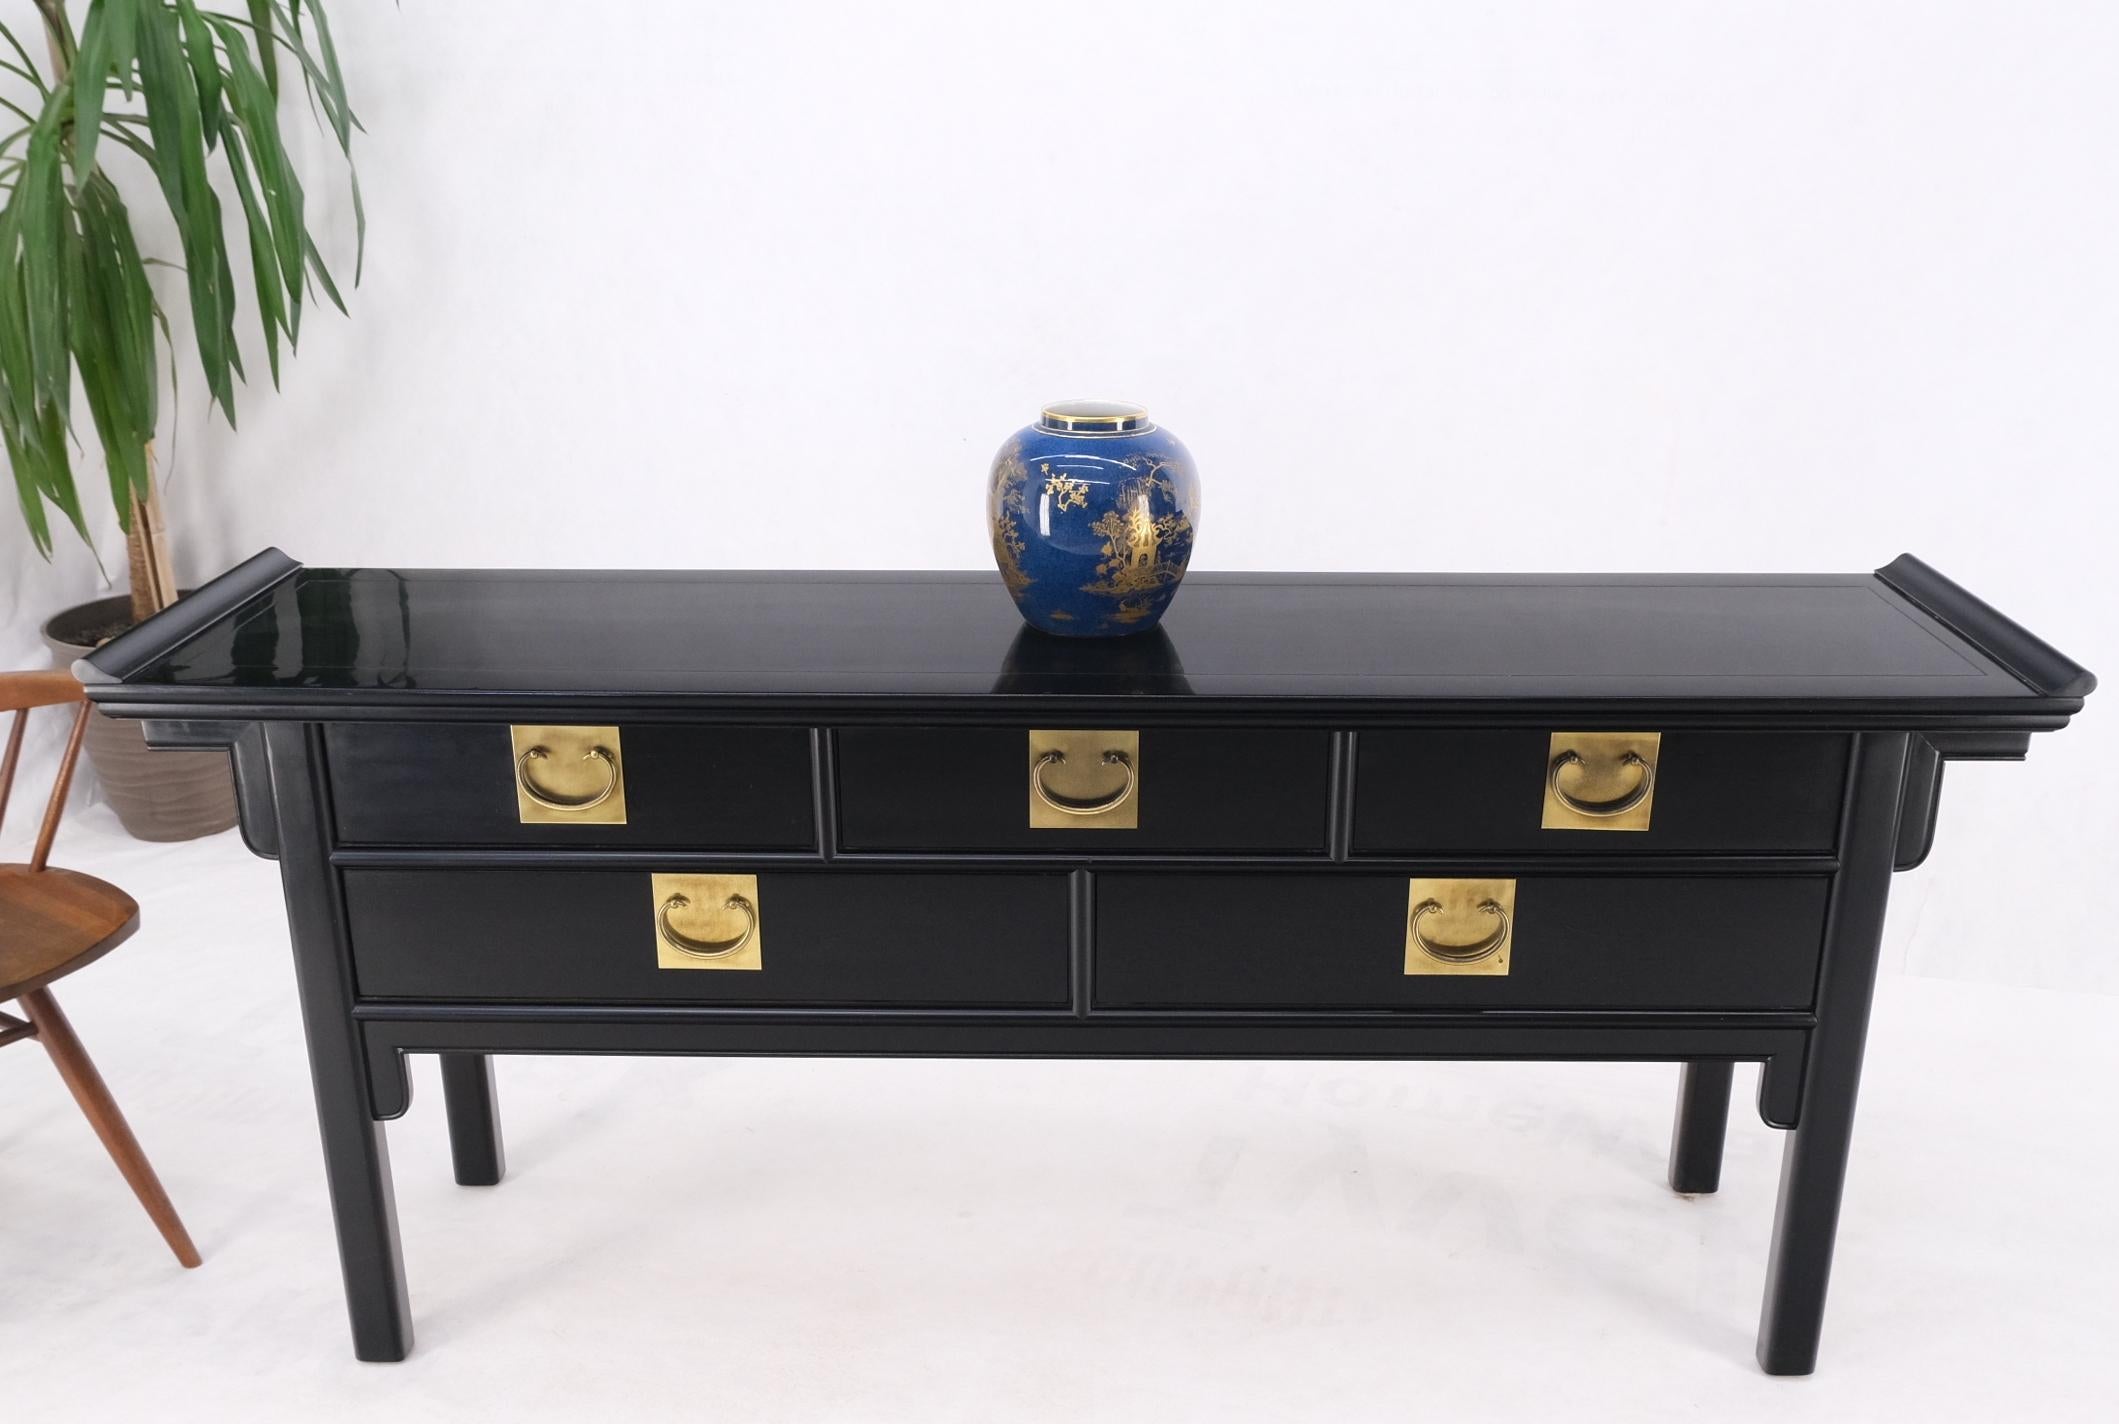 Black Lacquer Brass Hardware 5 Drawers Oriental Long Credenza Console Table Mint 7